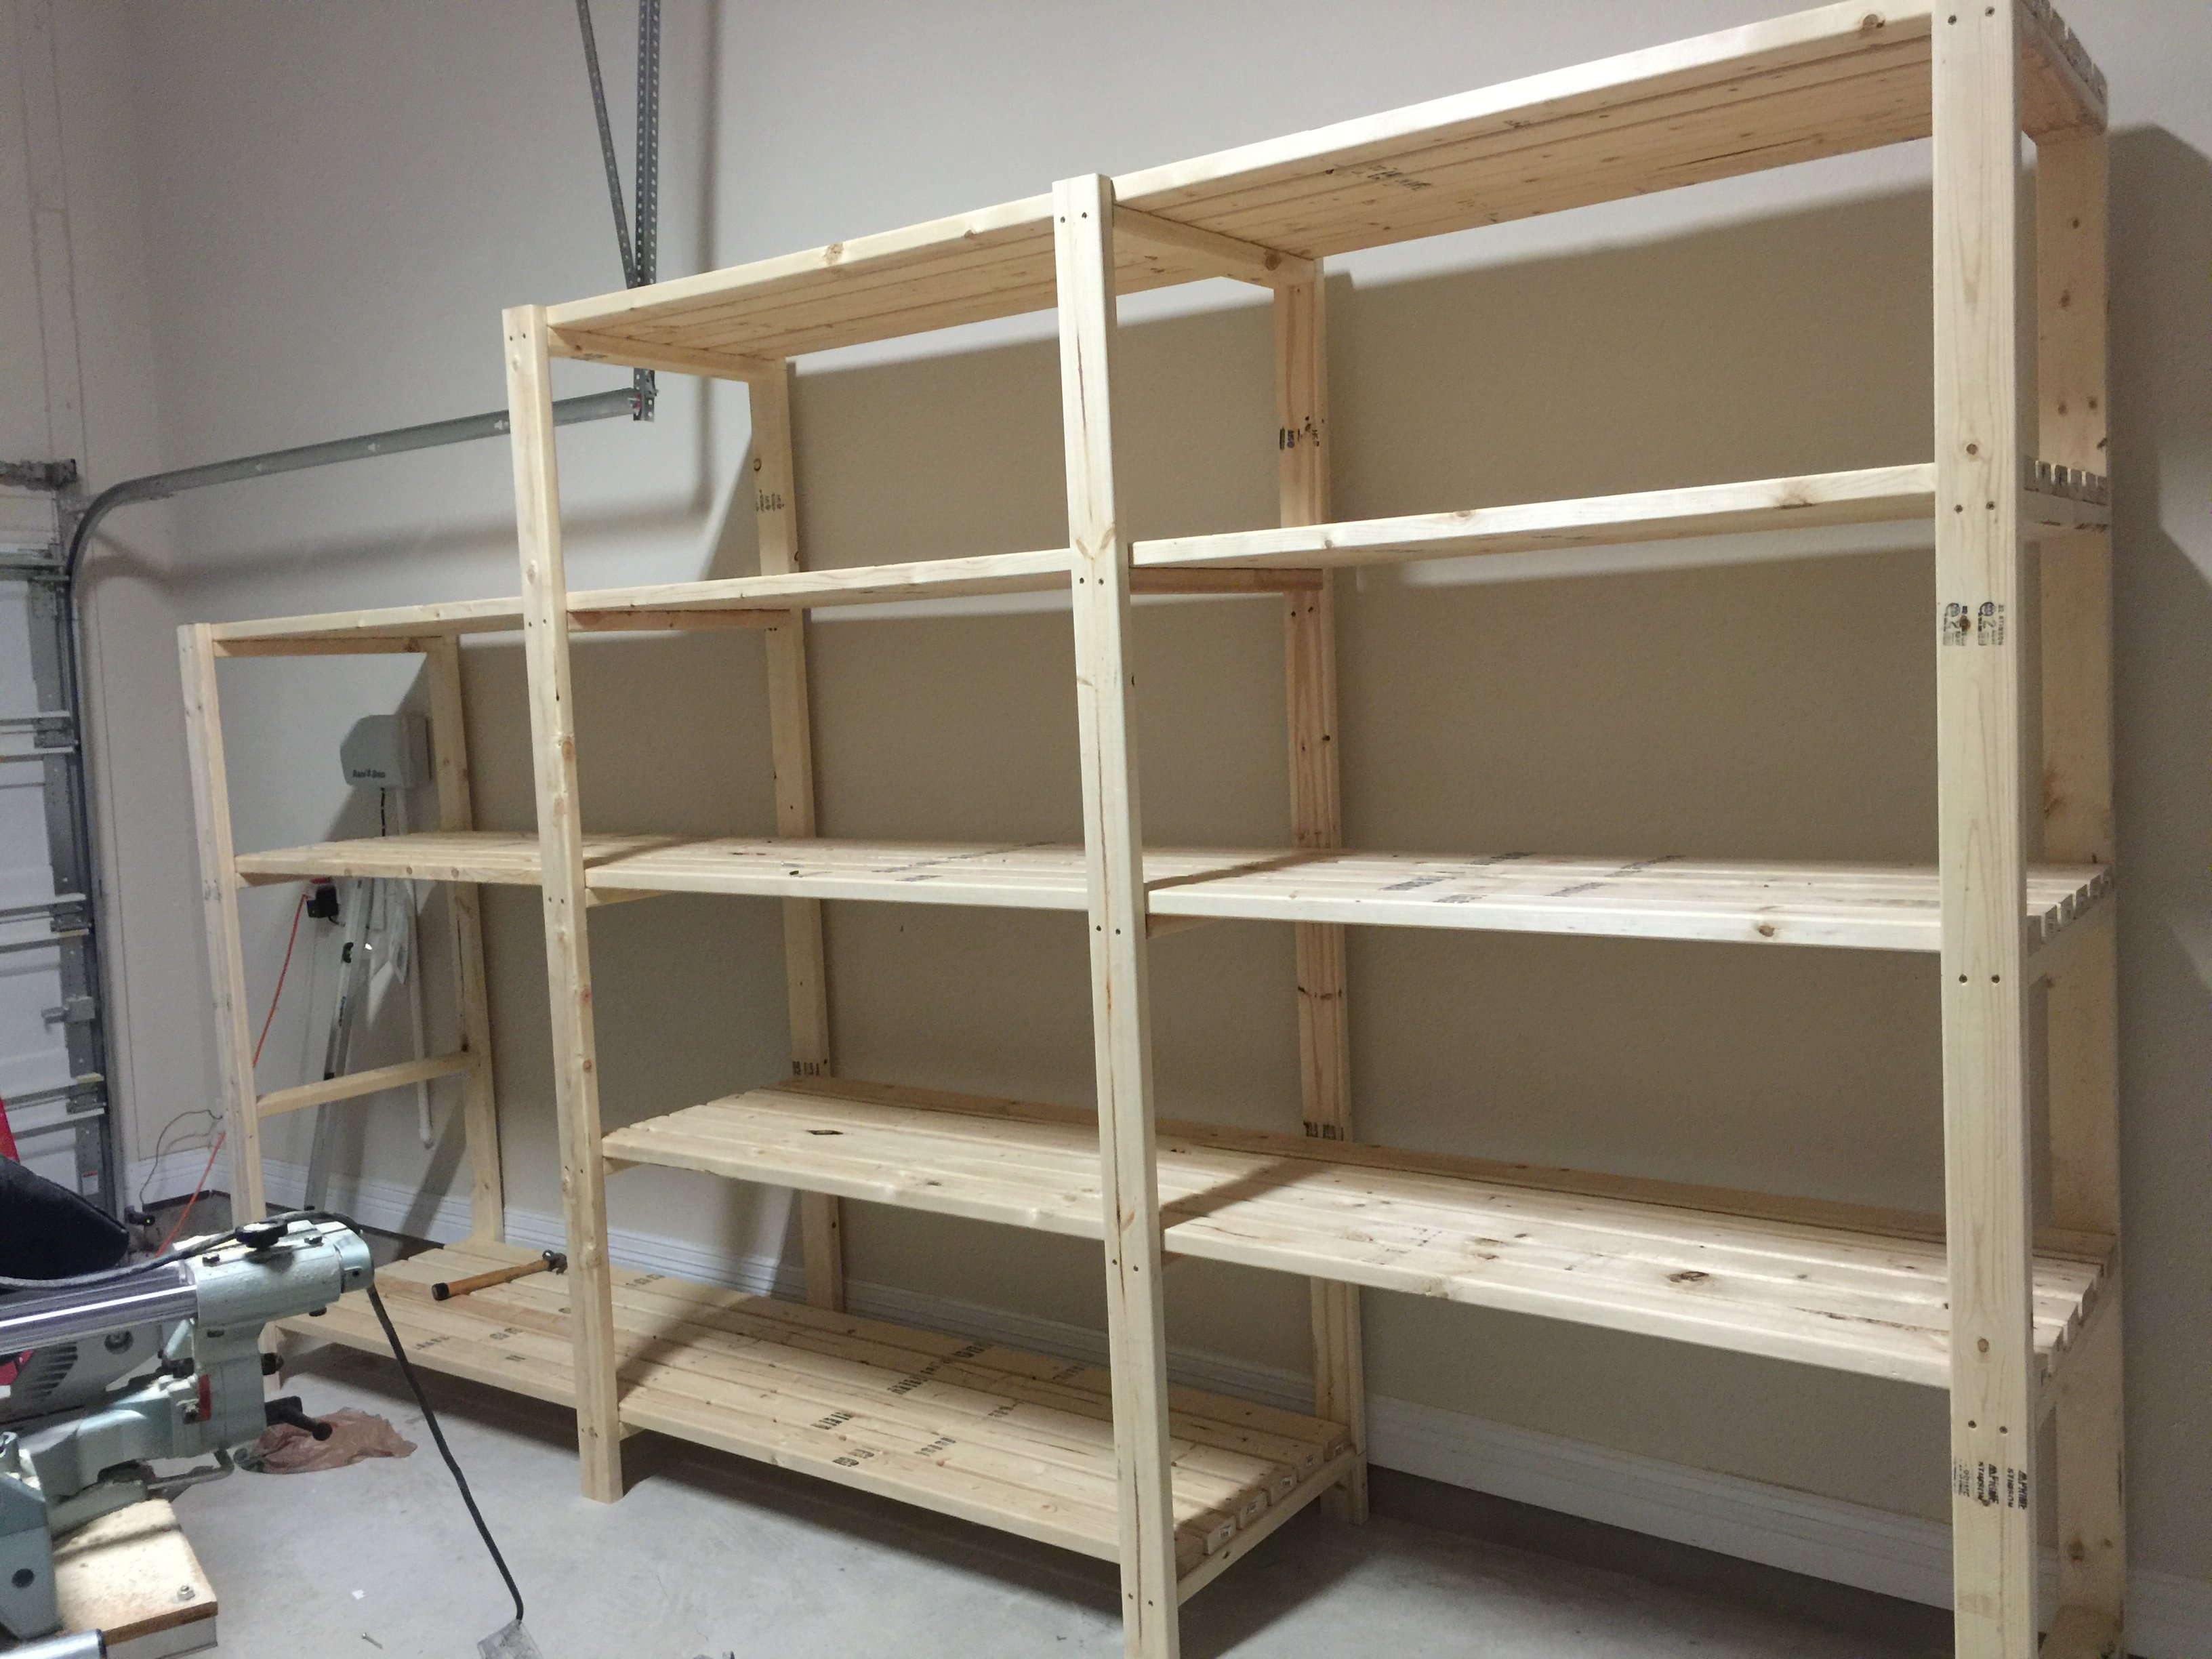 Ana White | Garage Shelving - DIY Projects